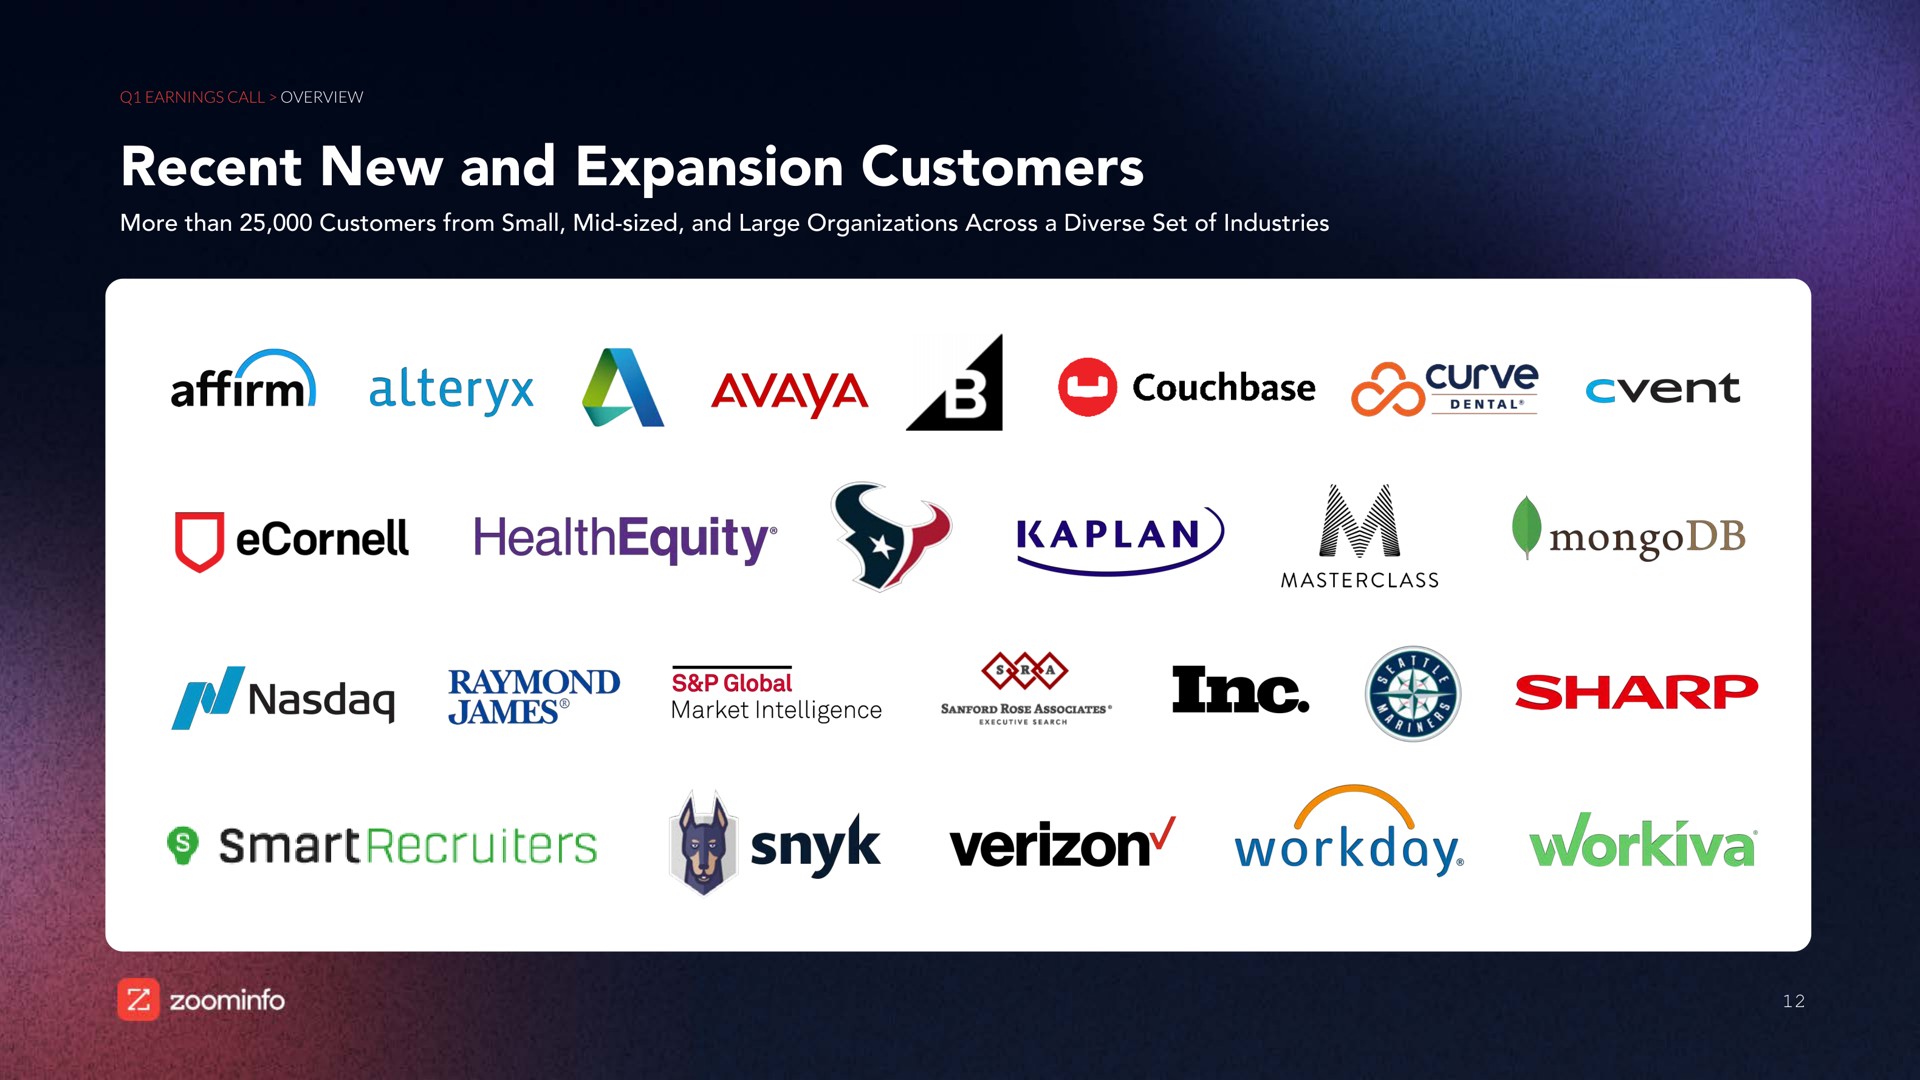 recent new and expansion customers affirm a sharp workday i | Zoominfo